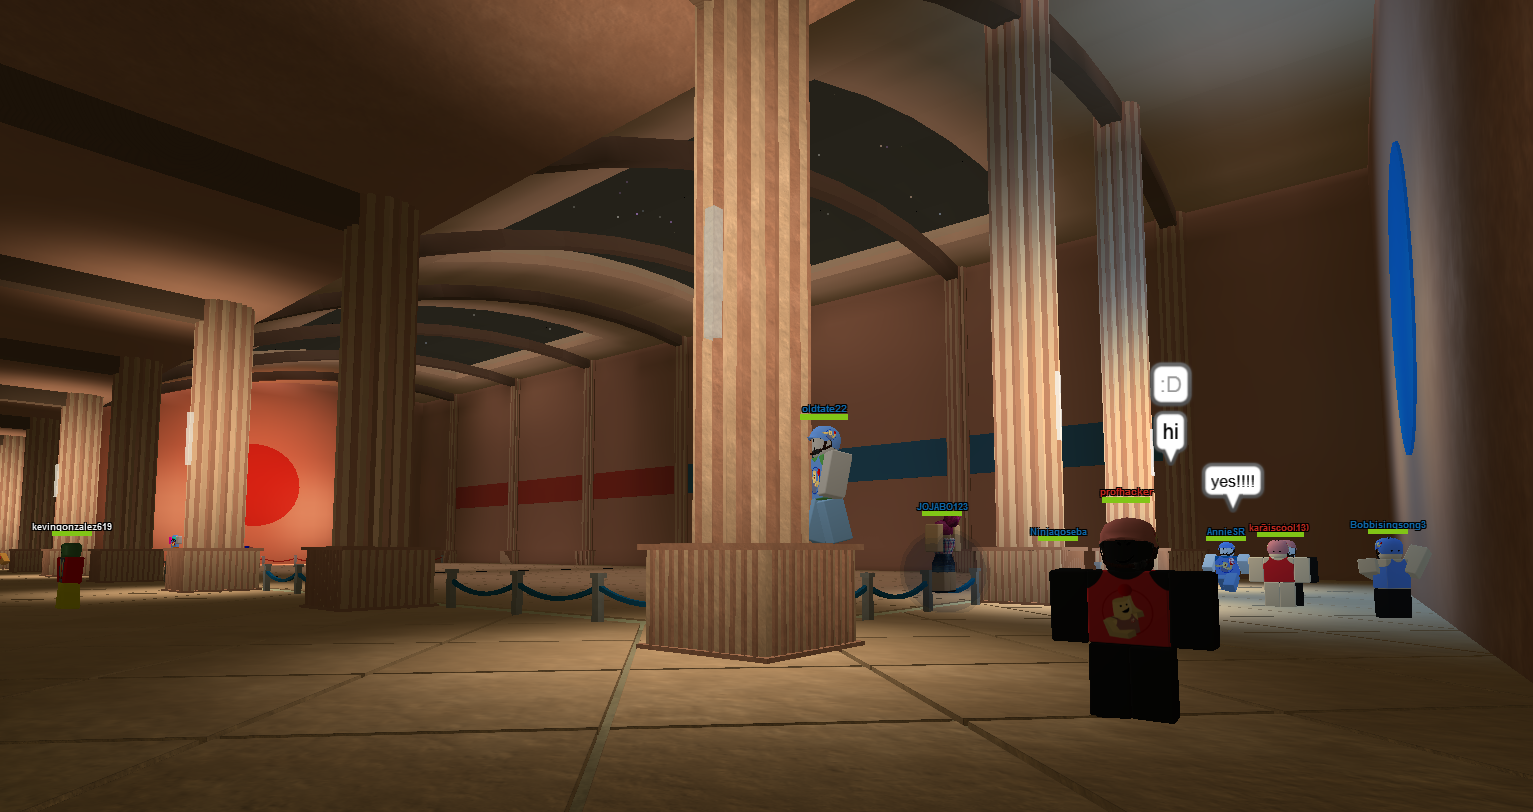 It's easy to forget about when the balls start flying, but the ROBLOX Dodgeball map is really beautiful and detailed.